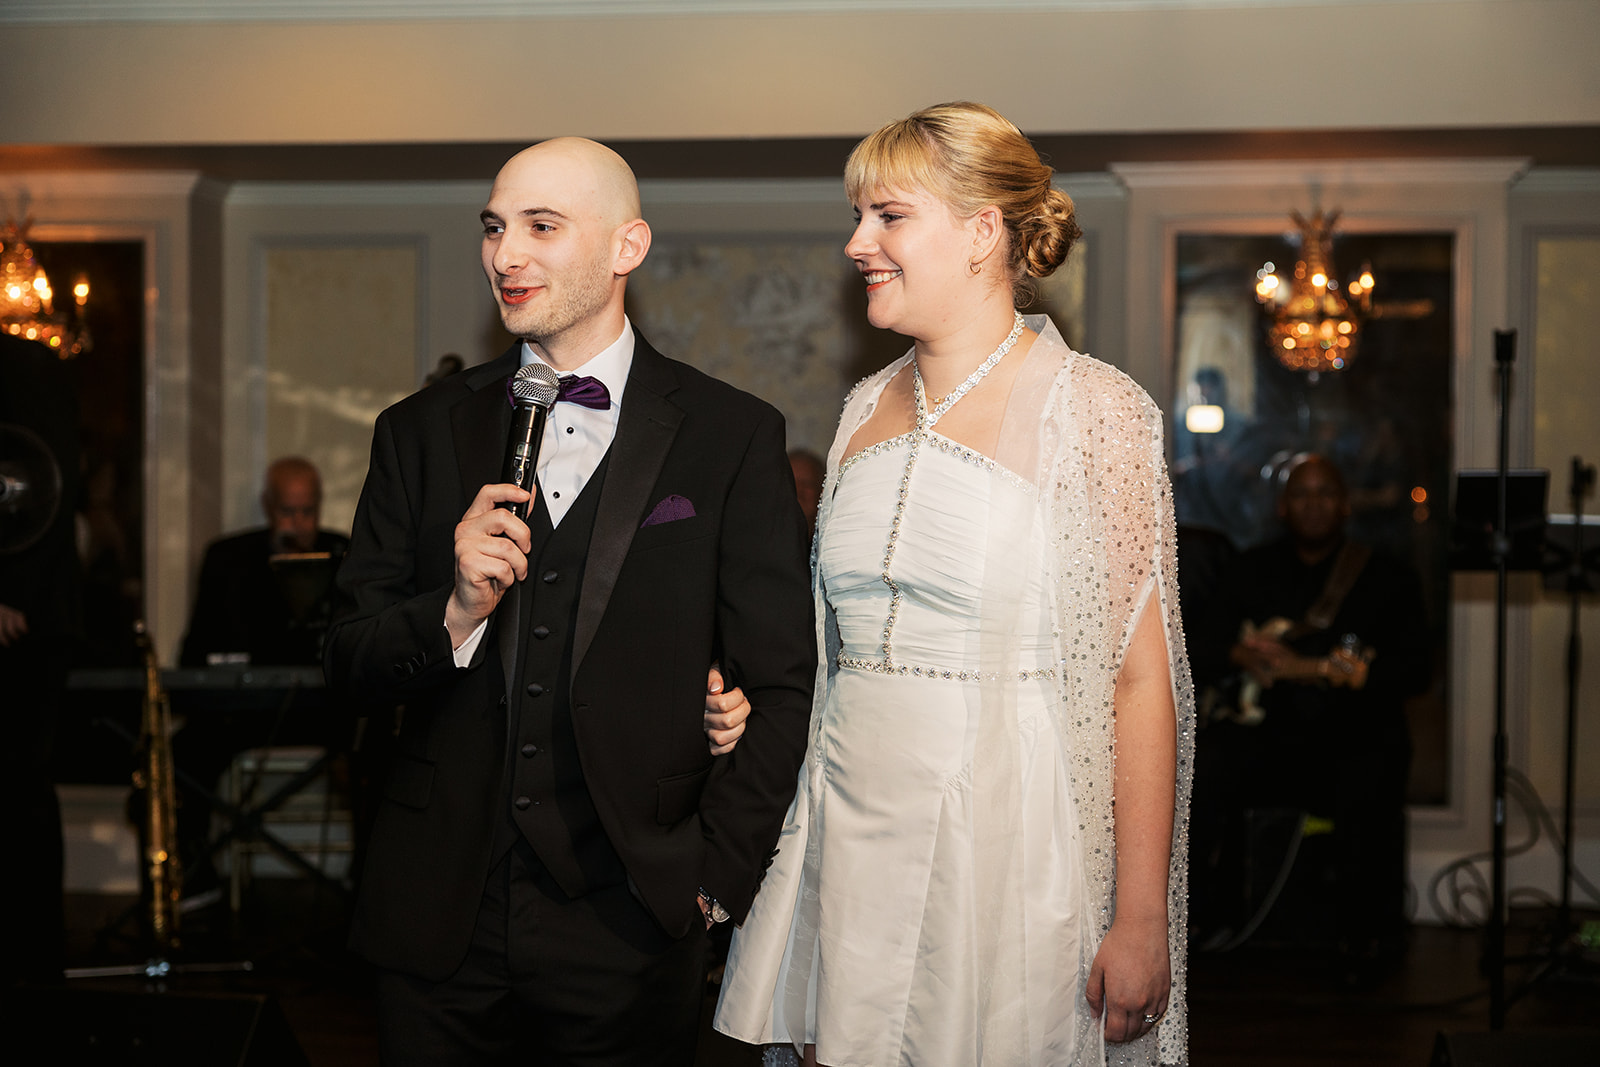 Newlyweds give a speech at their wedding reception with a wireless mic